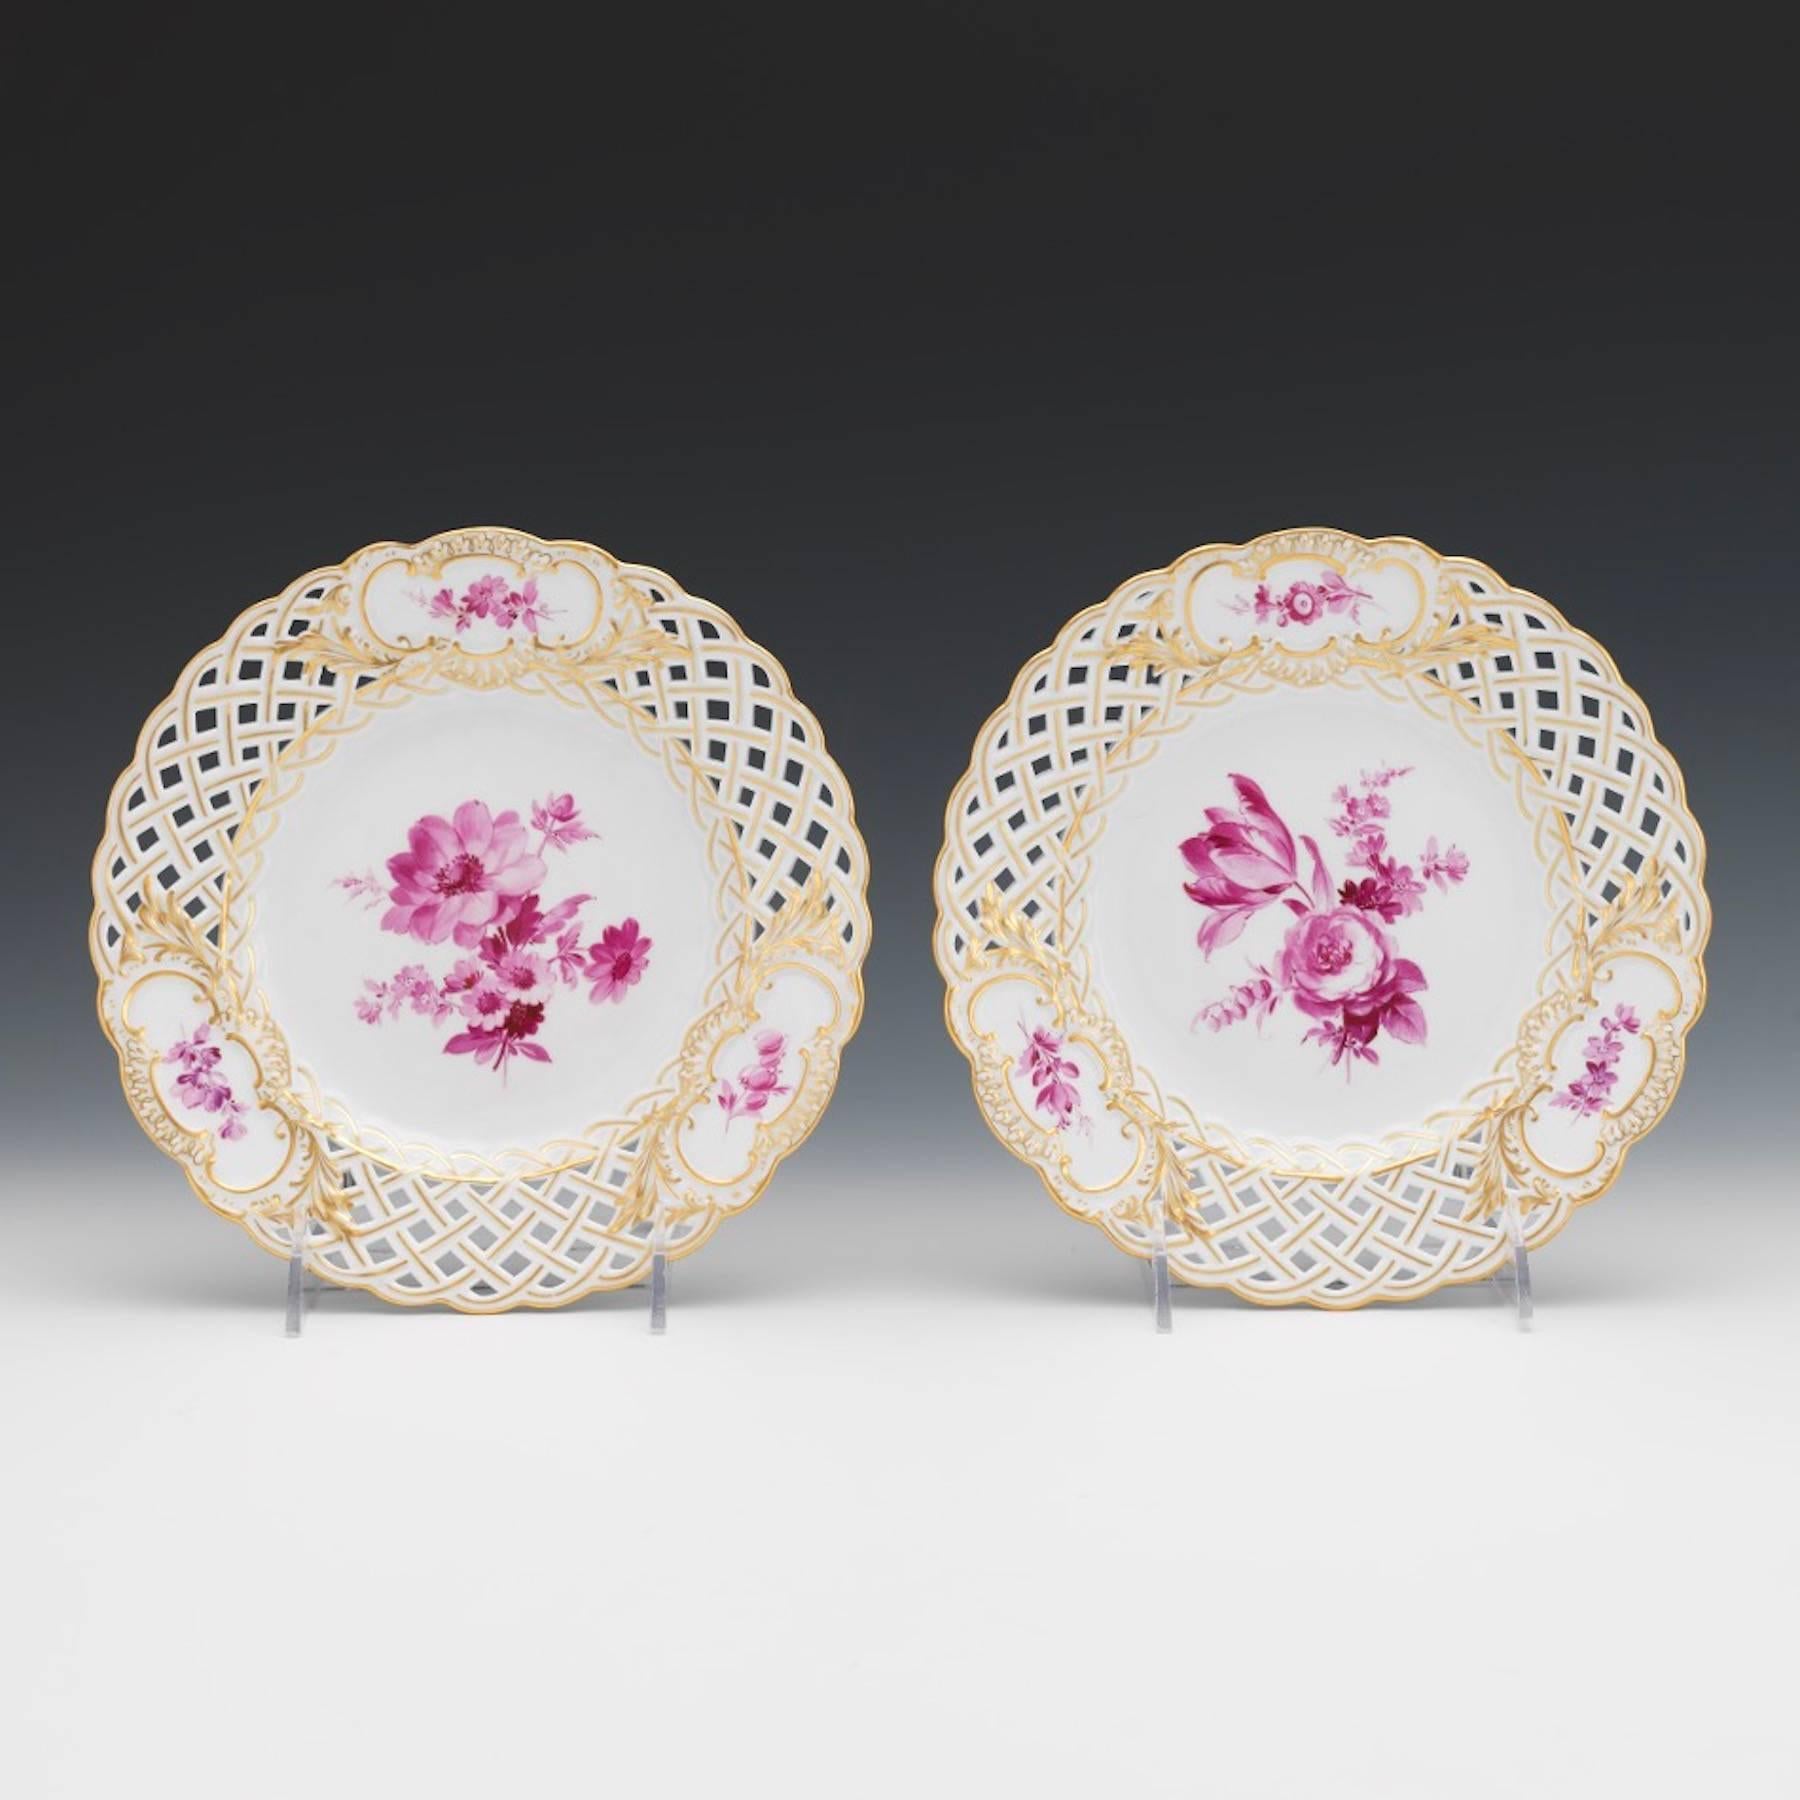 Eight Meissen reticulated painted floral motif dessert or second course plates, in a vibrant monochrome rose palette. Each plate painted with a large central bouquet, flanked by three smaller floral vignettes all are different individual floral